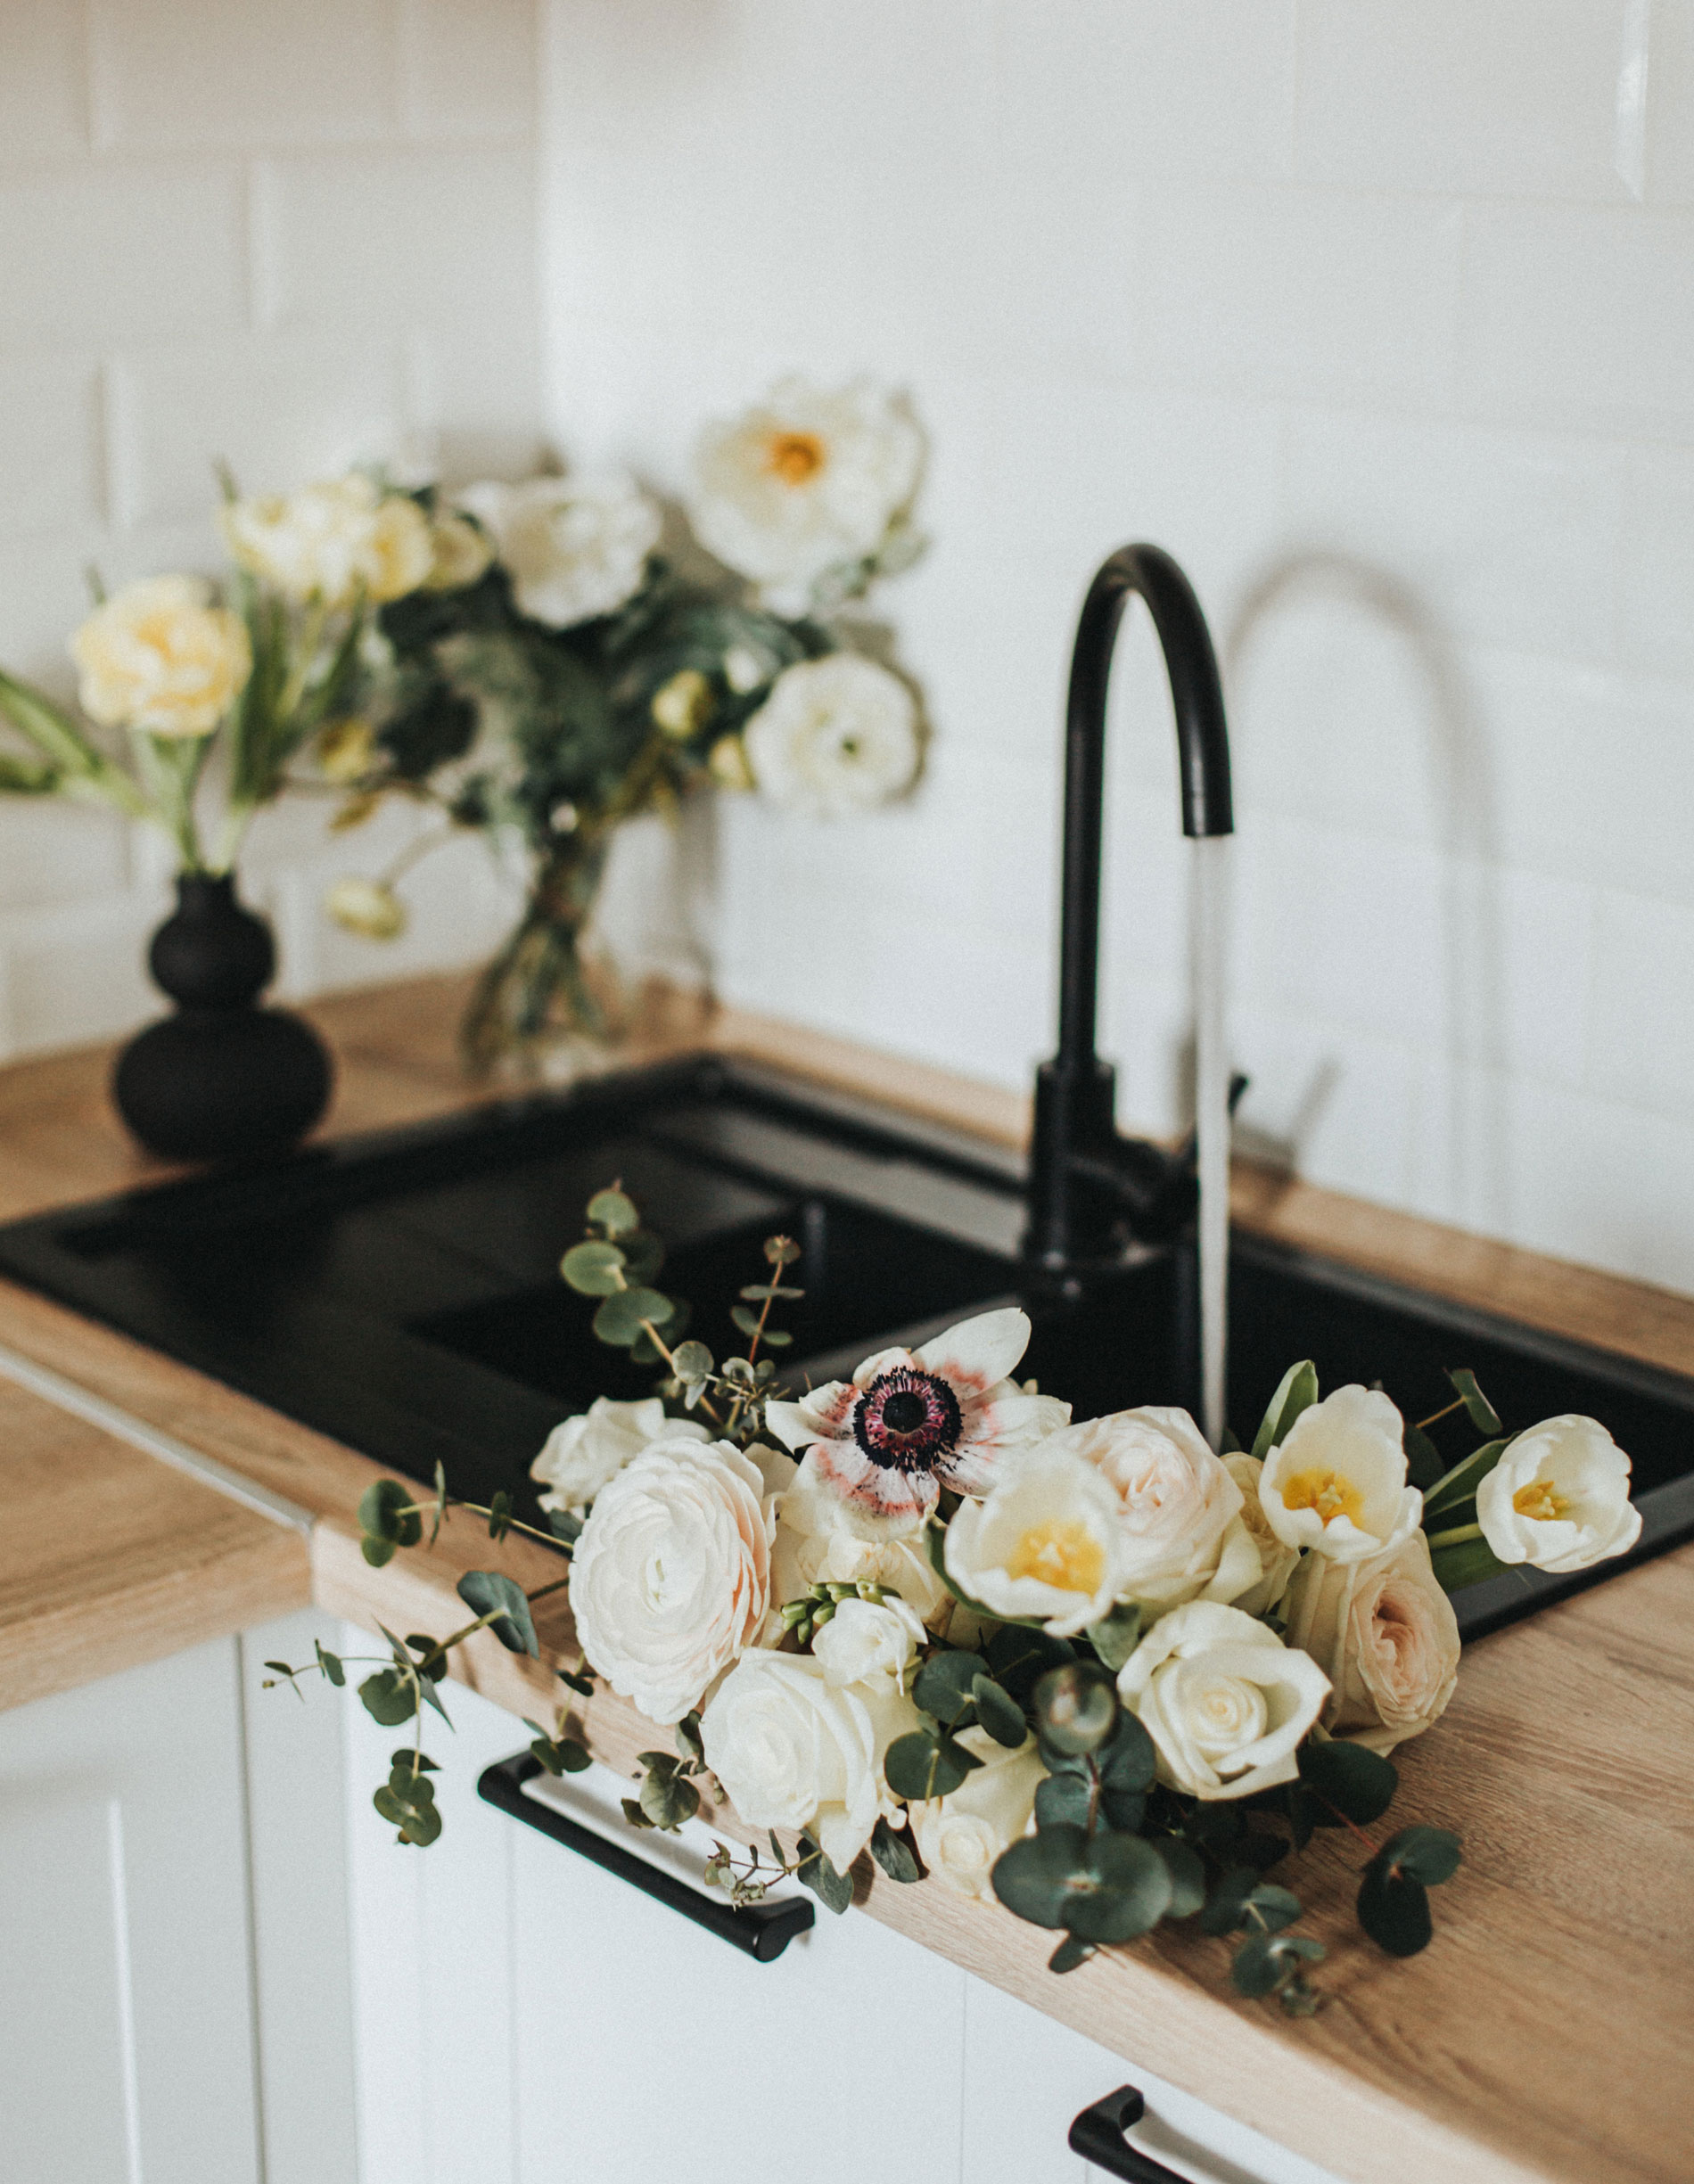 flowers in the kitchen sink